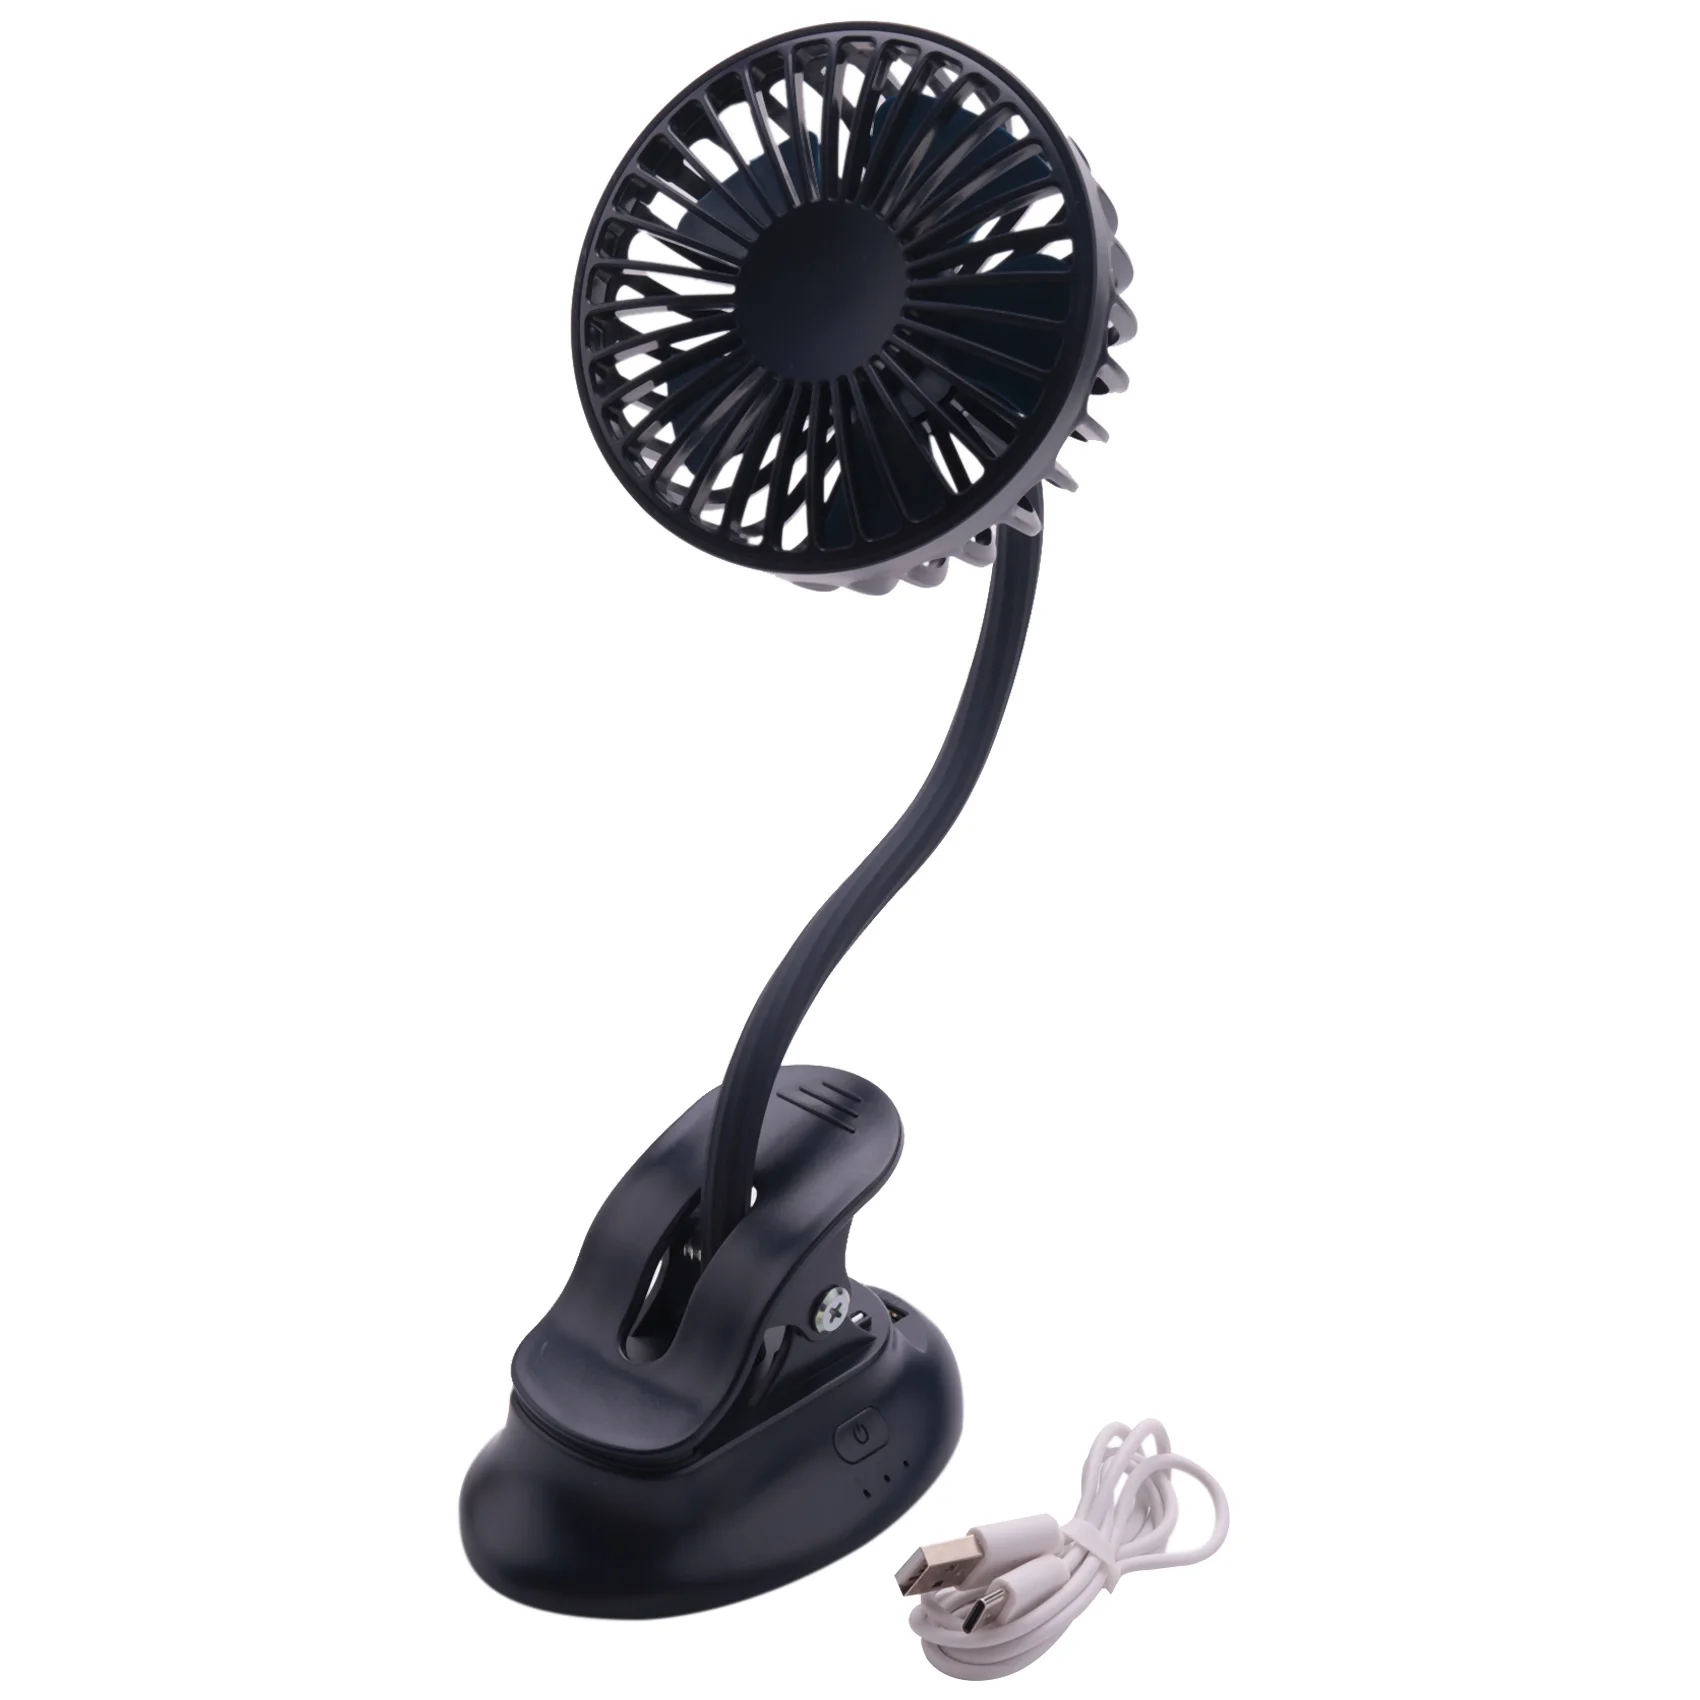 

Portable Mini Clip Stroller Fan,3 Speeds Settings,Flexible Bendable Usb Rechargeable Battery Operated Quiet Desk Fan For Home